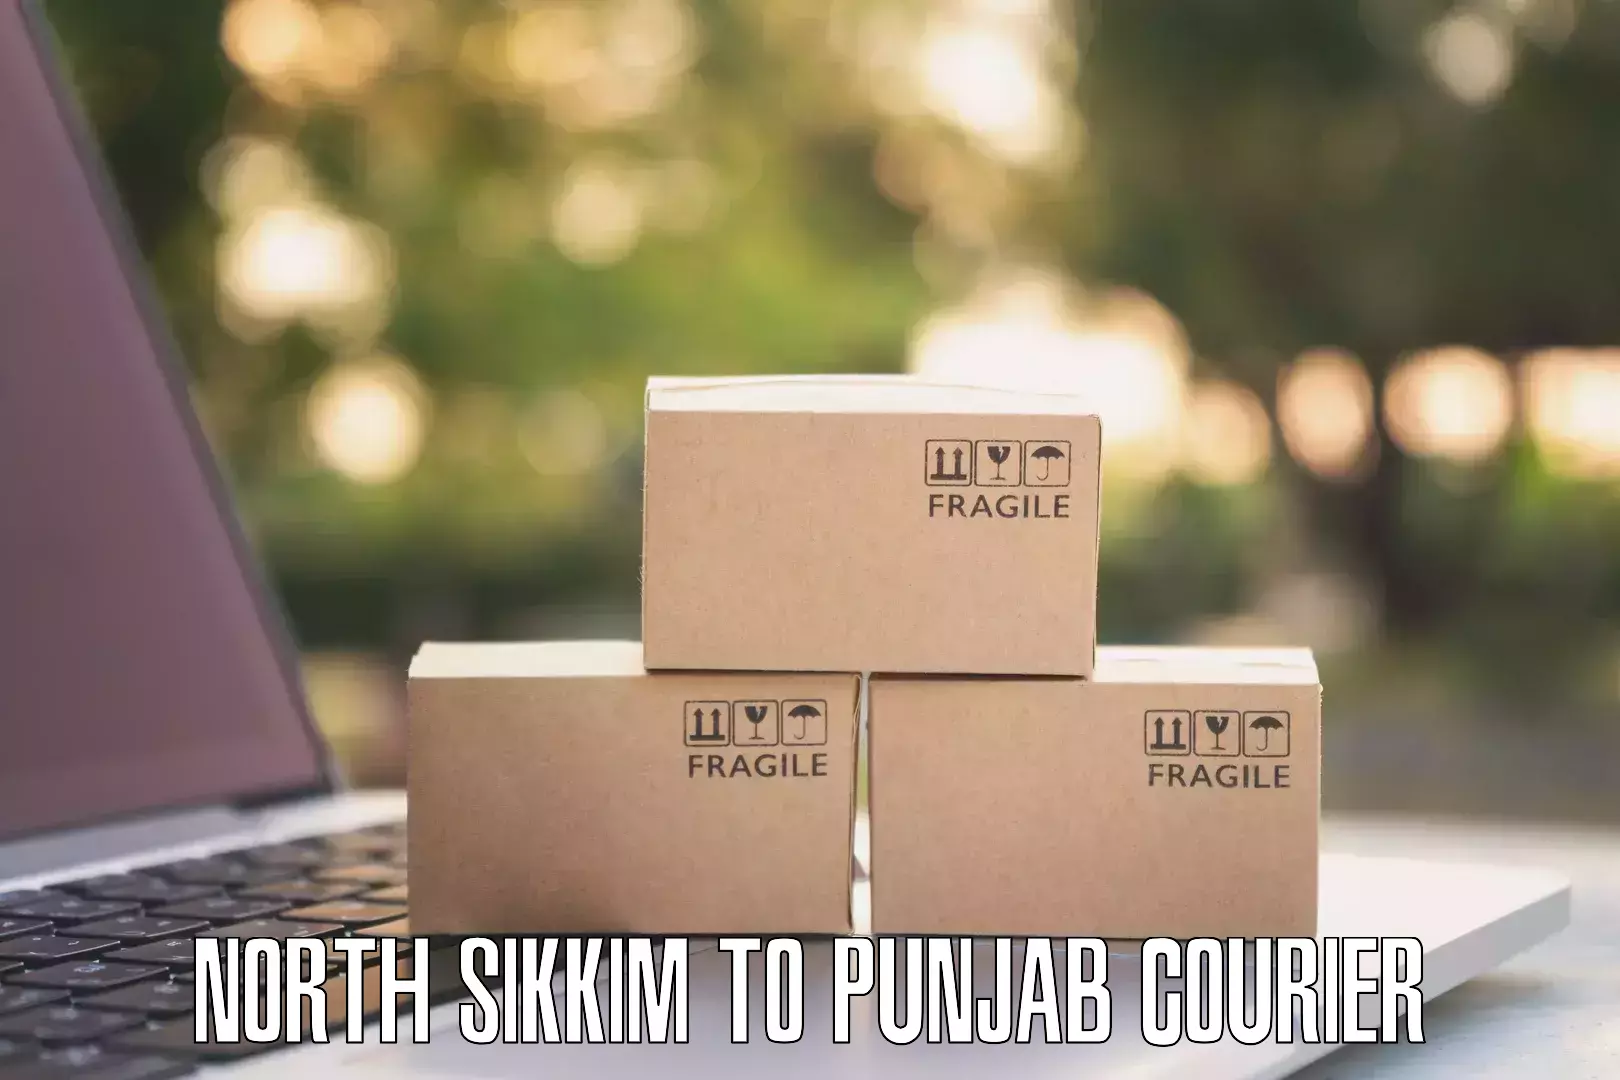 Nationwide shipping coverage in North Sikkim to Dhuri